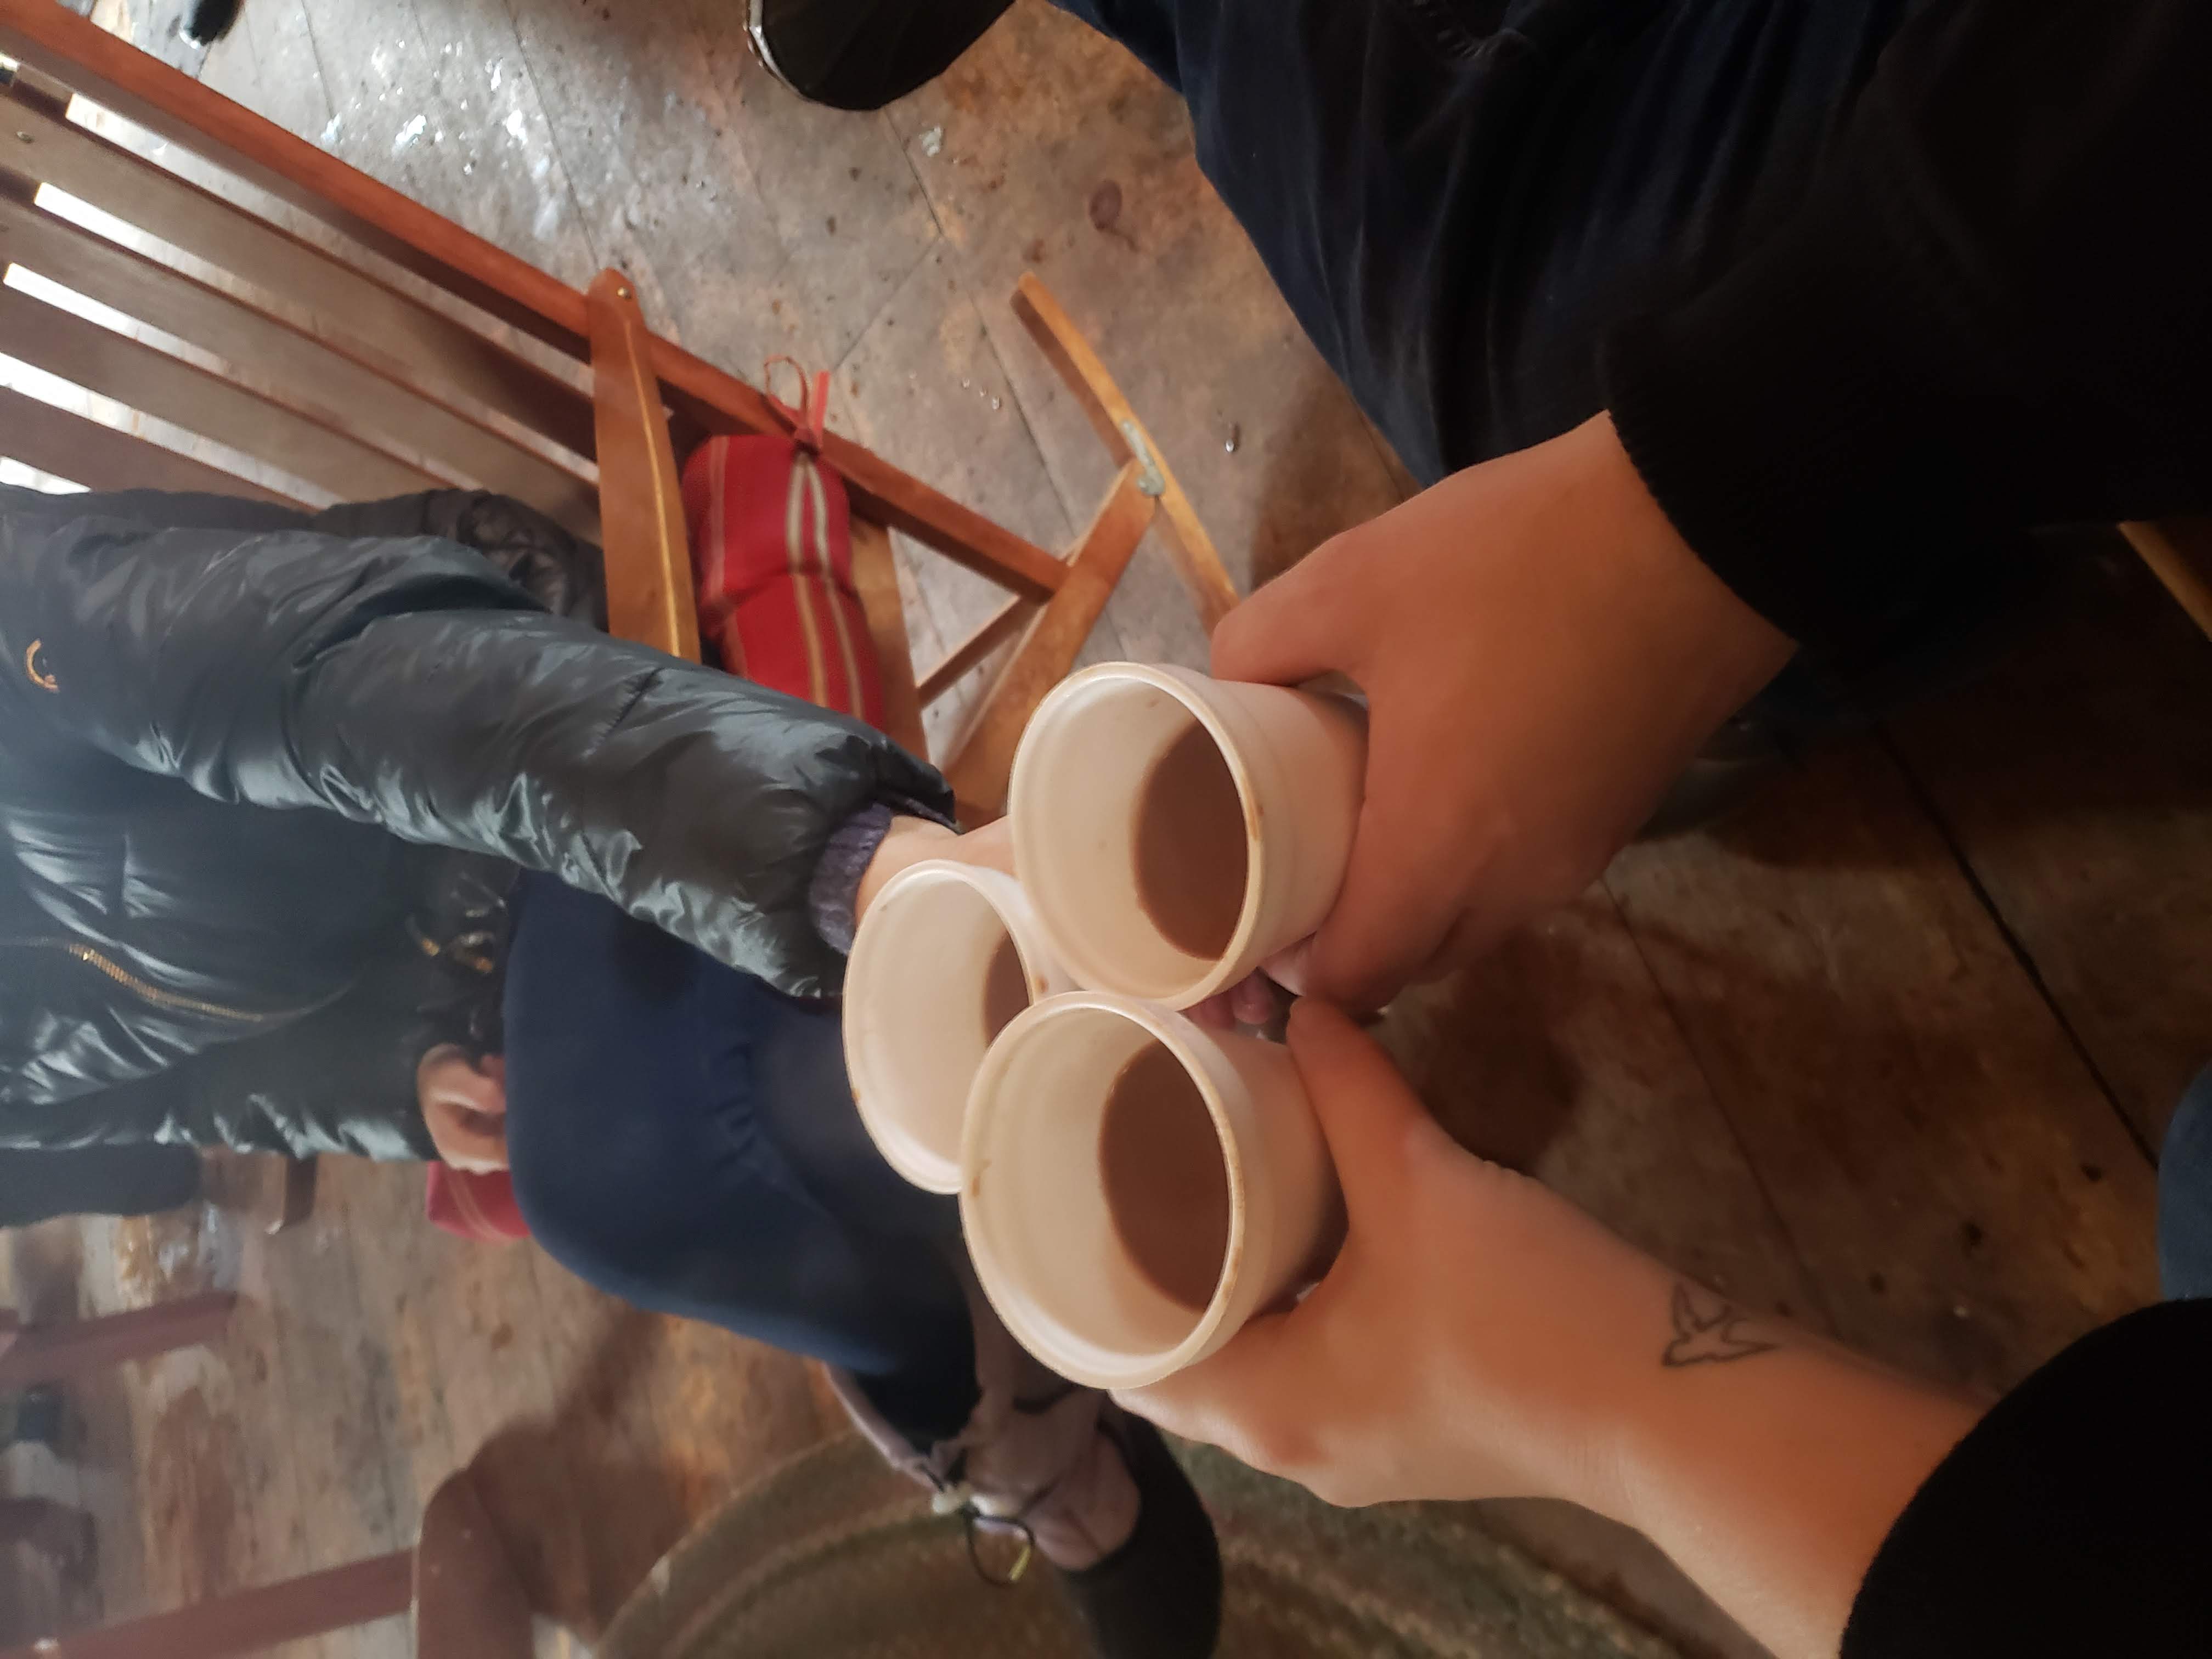 3 hands holding cups of hot chocolate